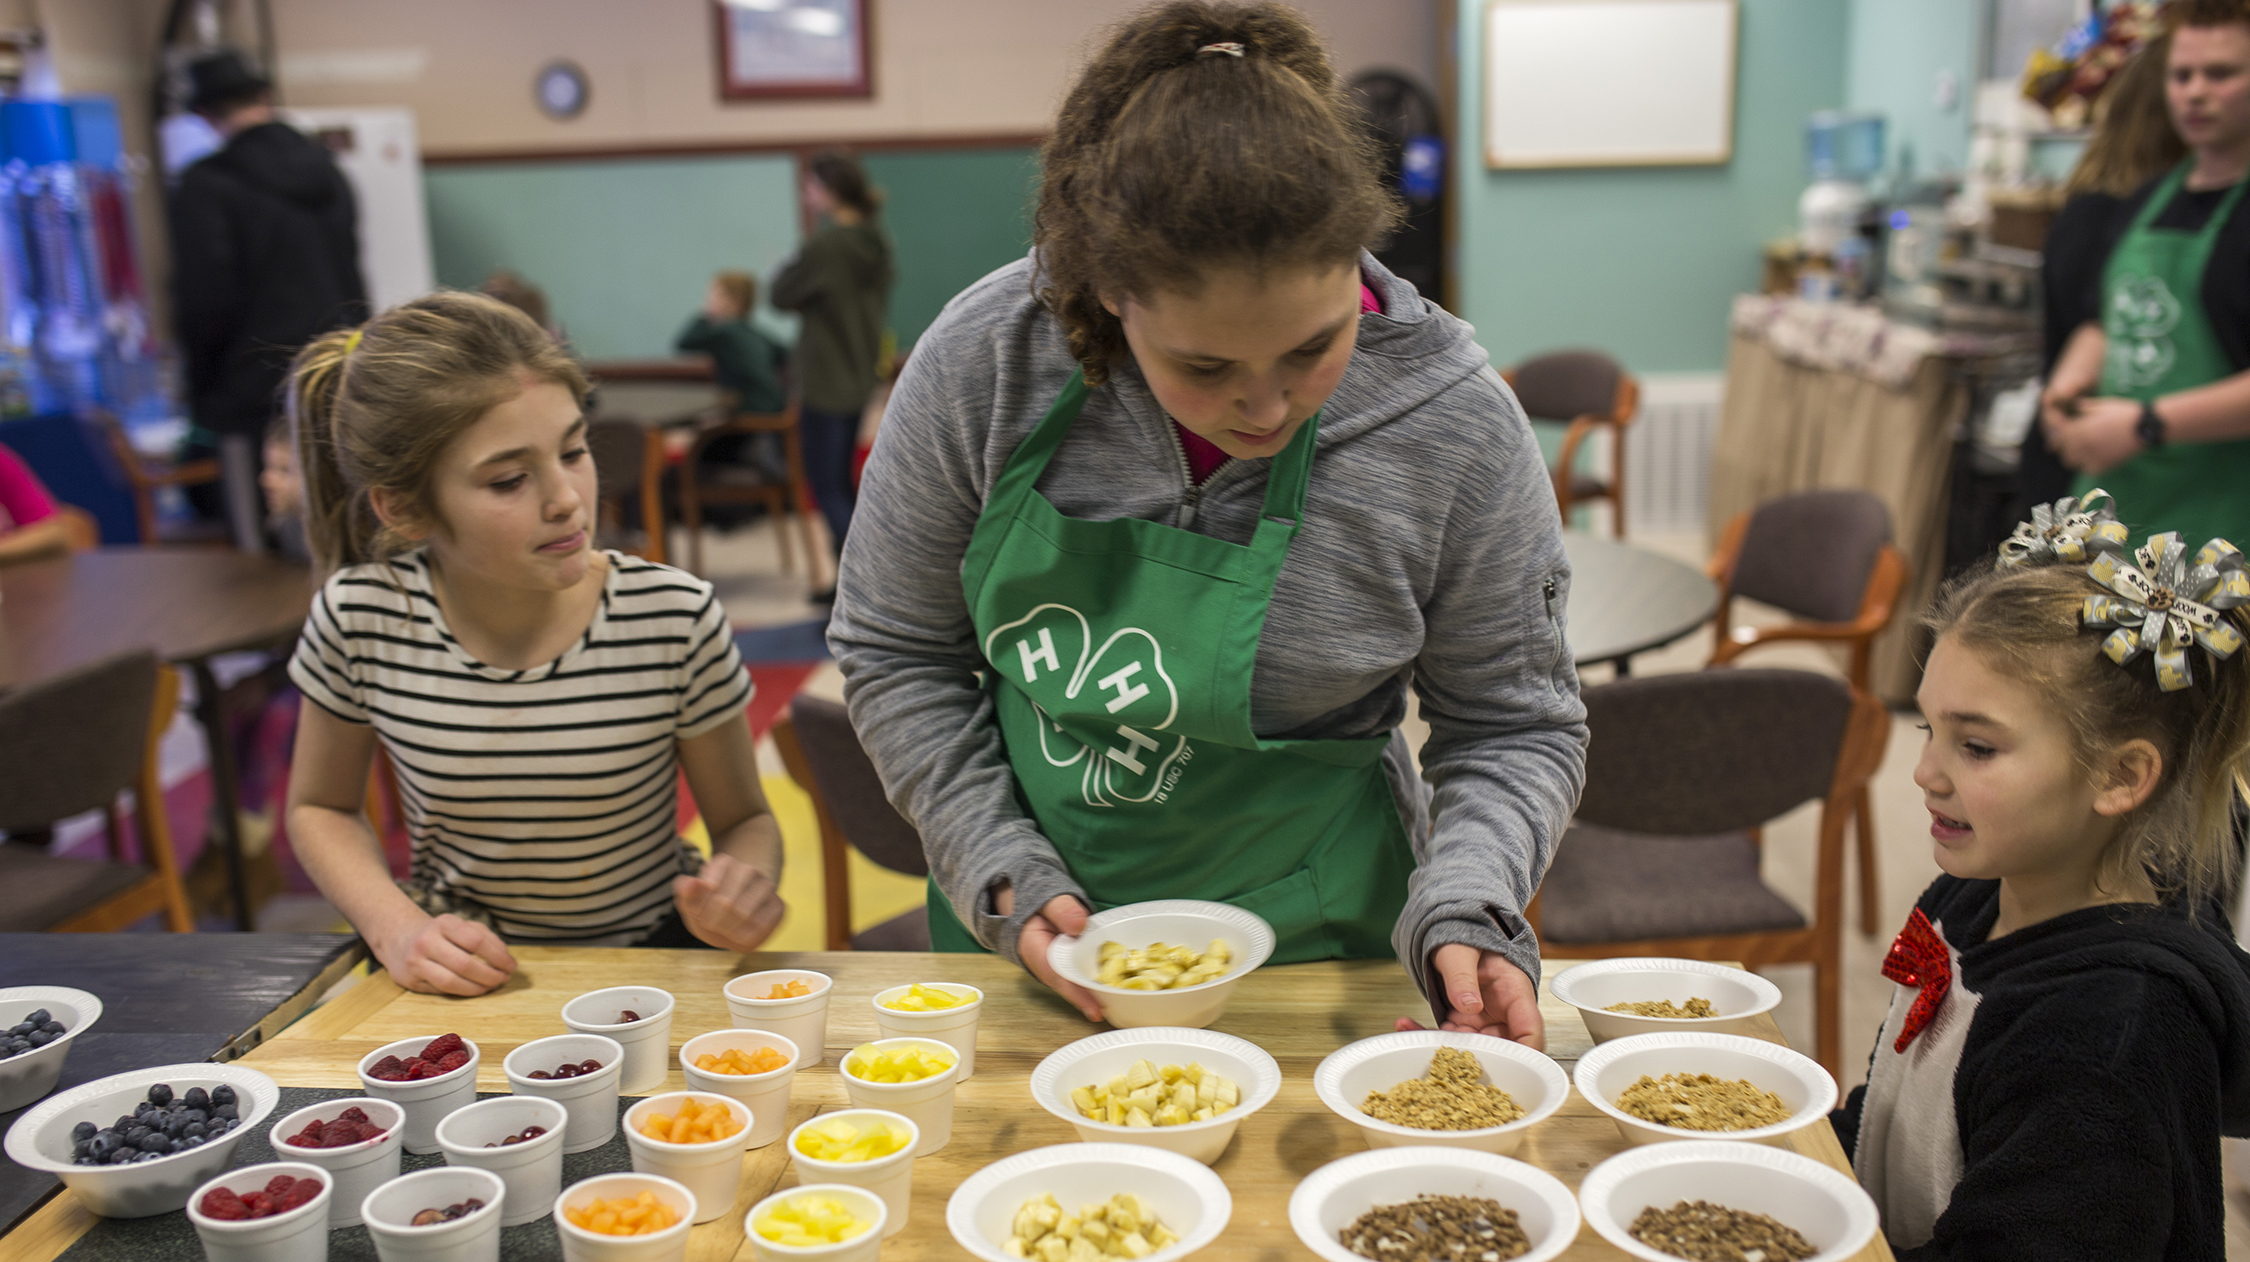 adult helps young children dish out food